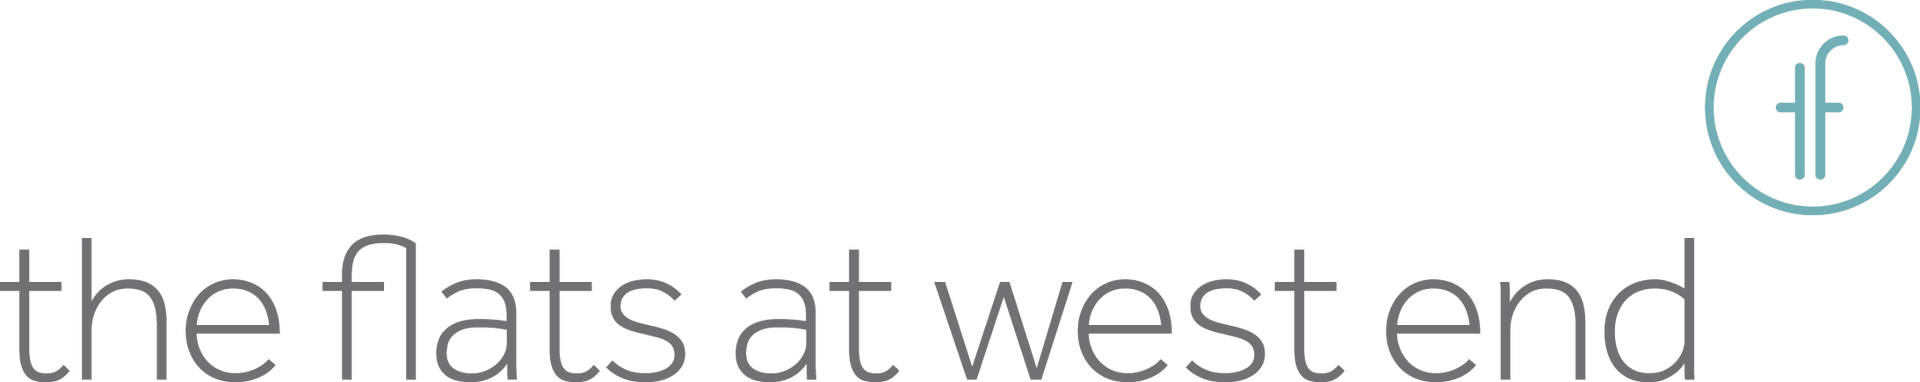 the flats at west end logo on a white background